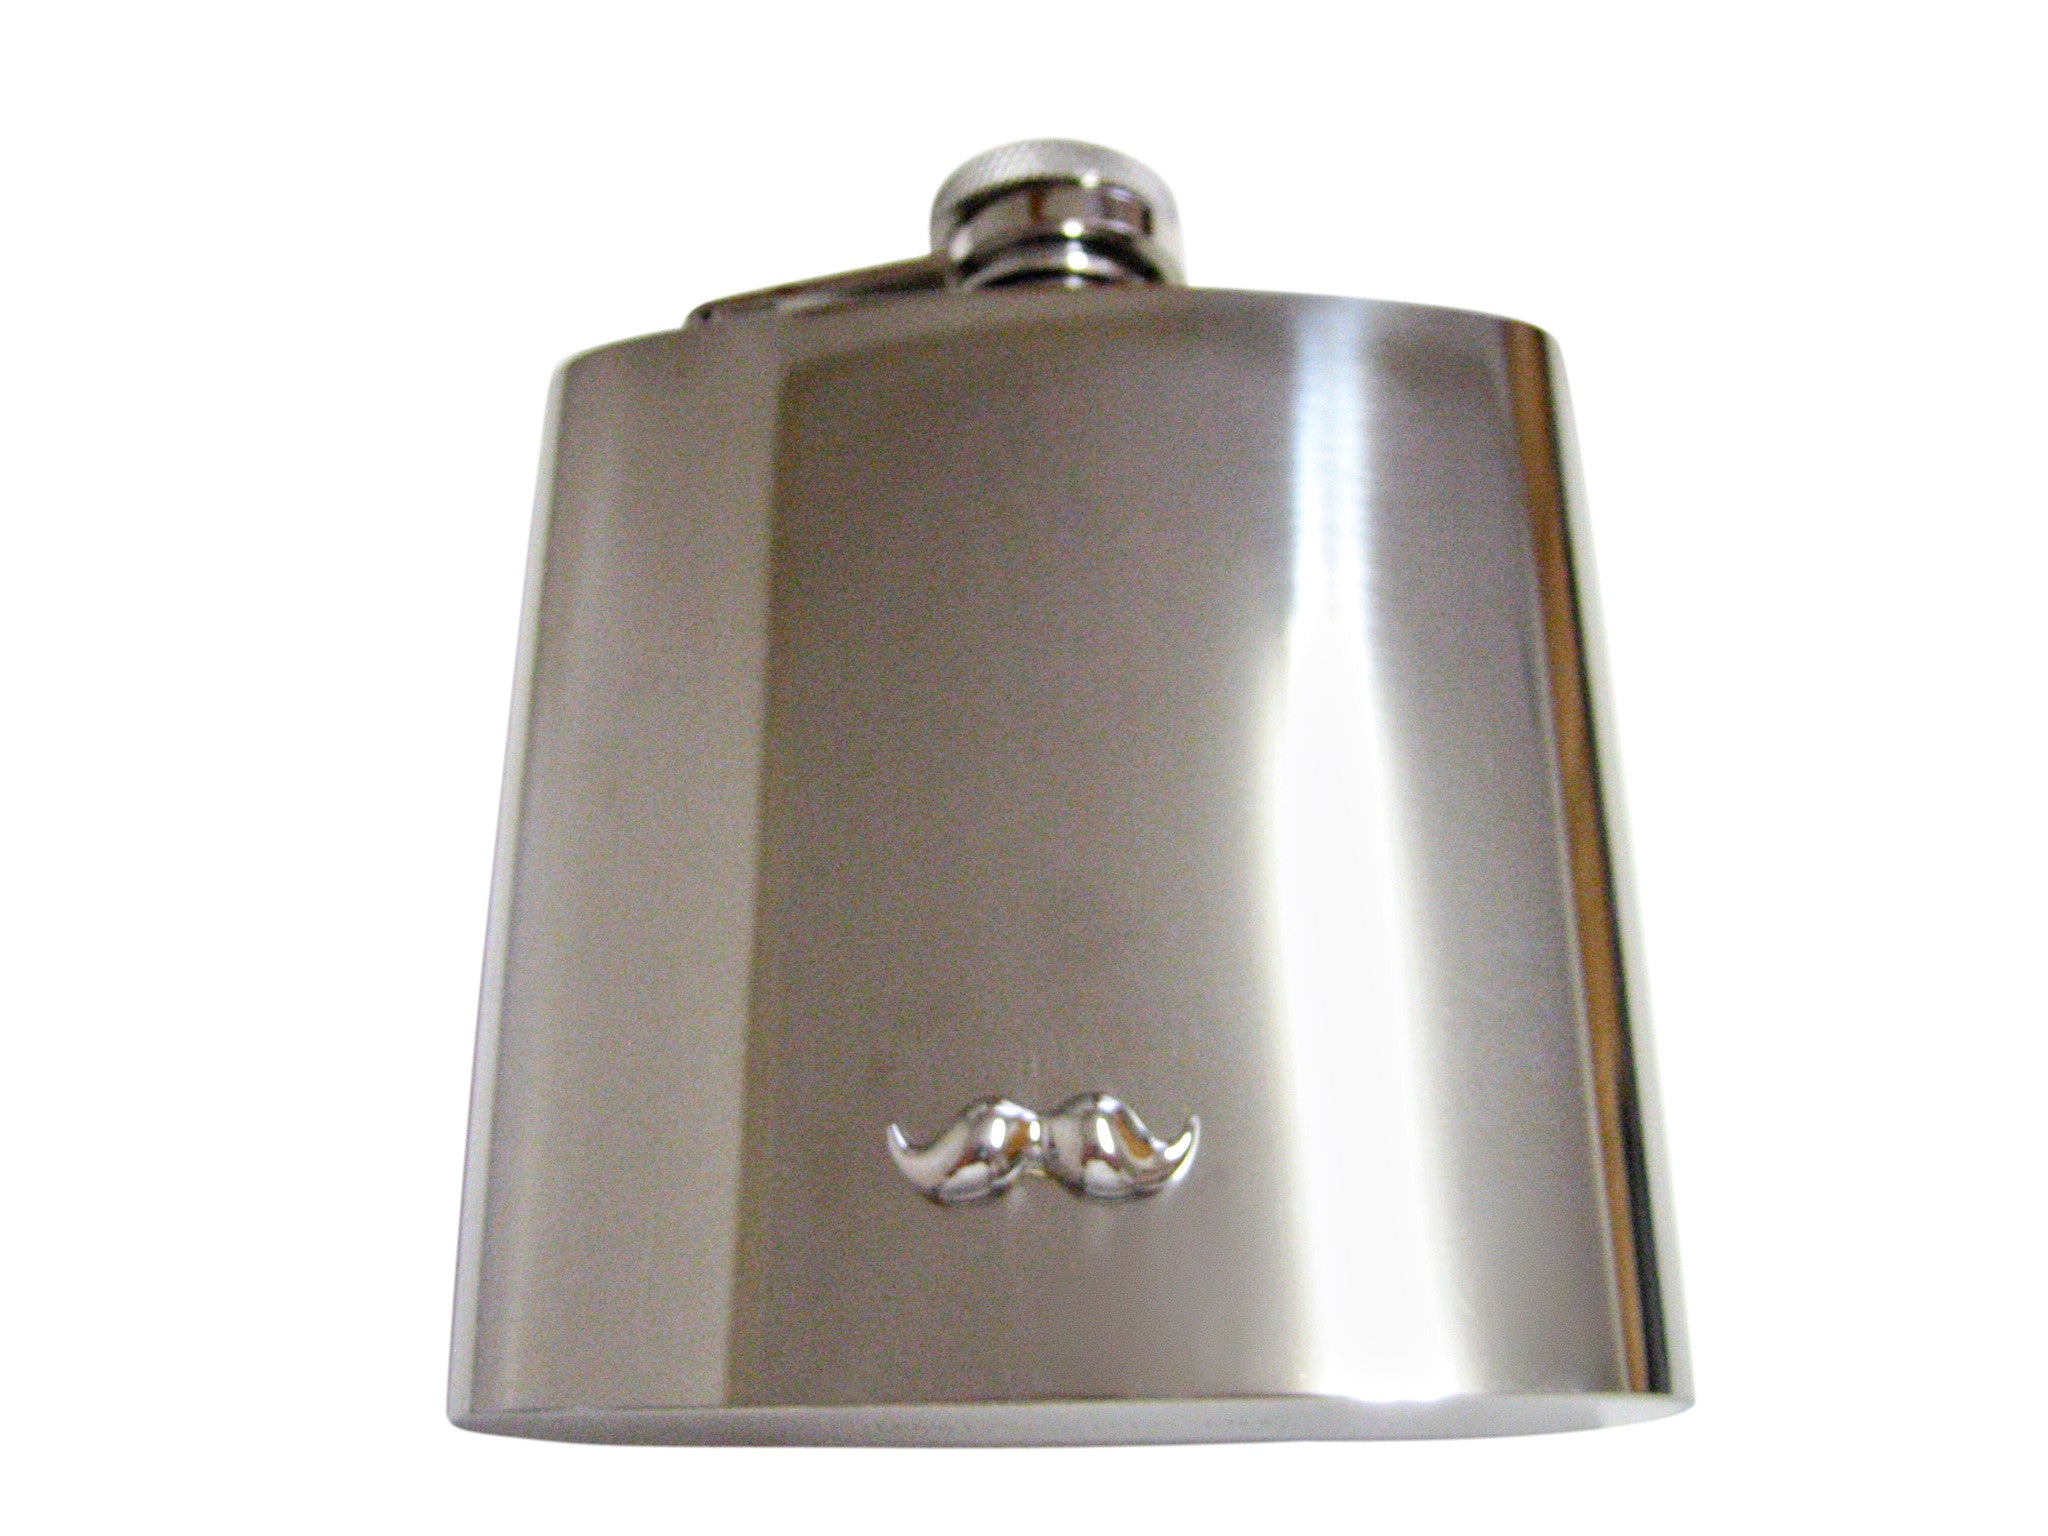 Hipster Mustache 6 Oz. Stainless Steel Flask